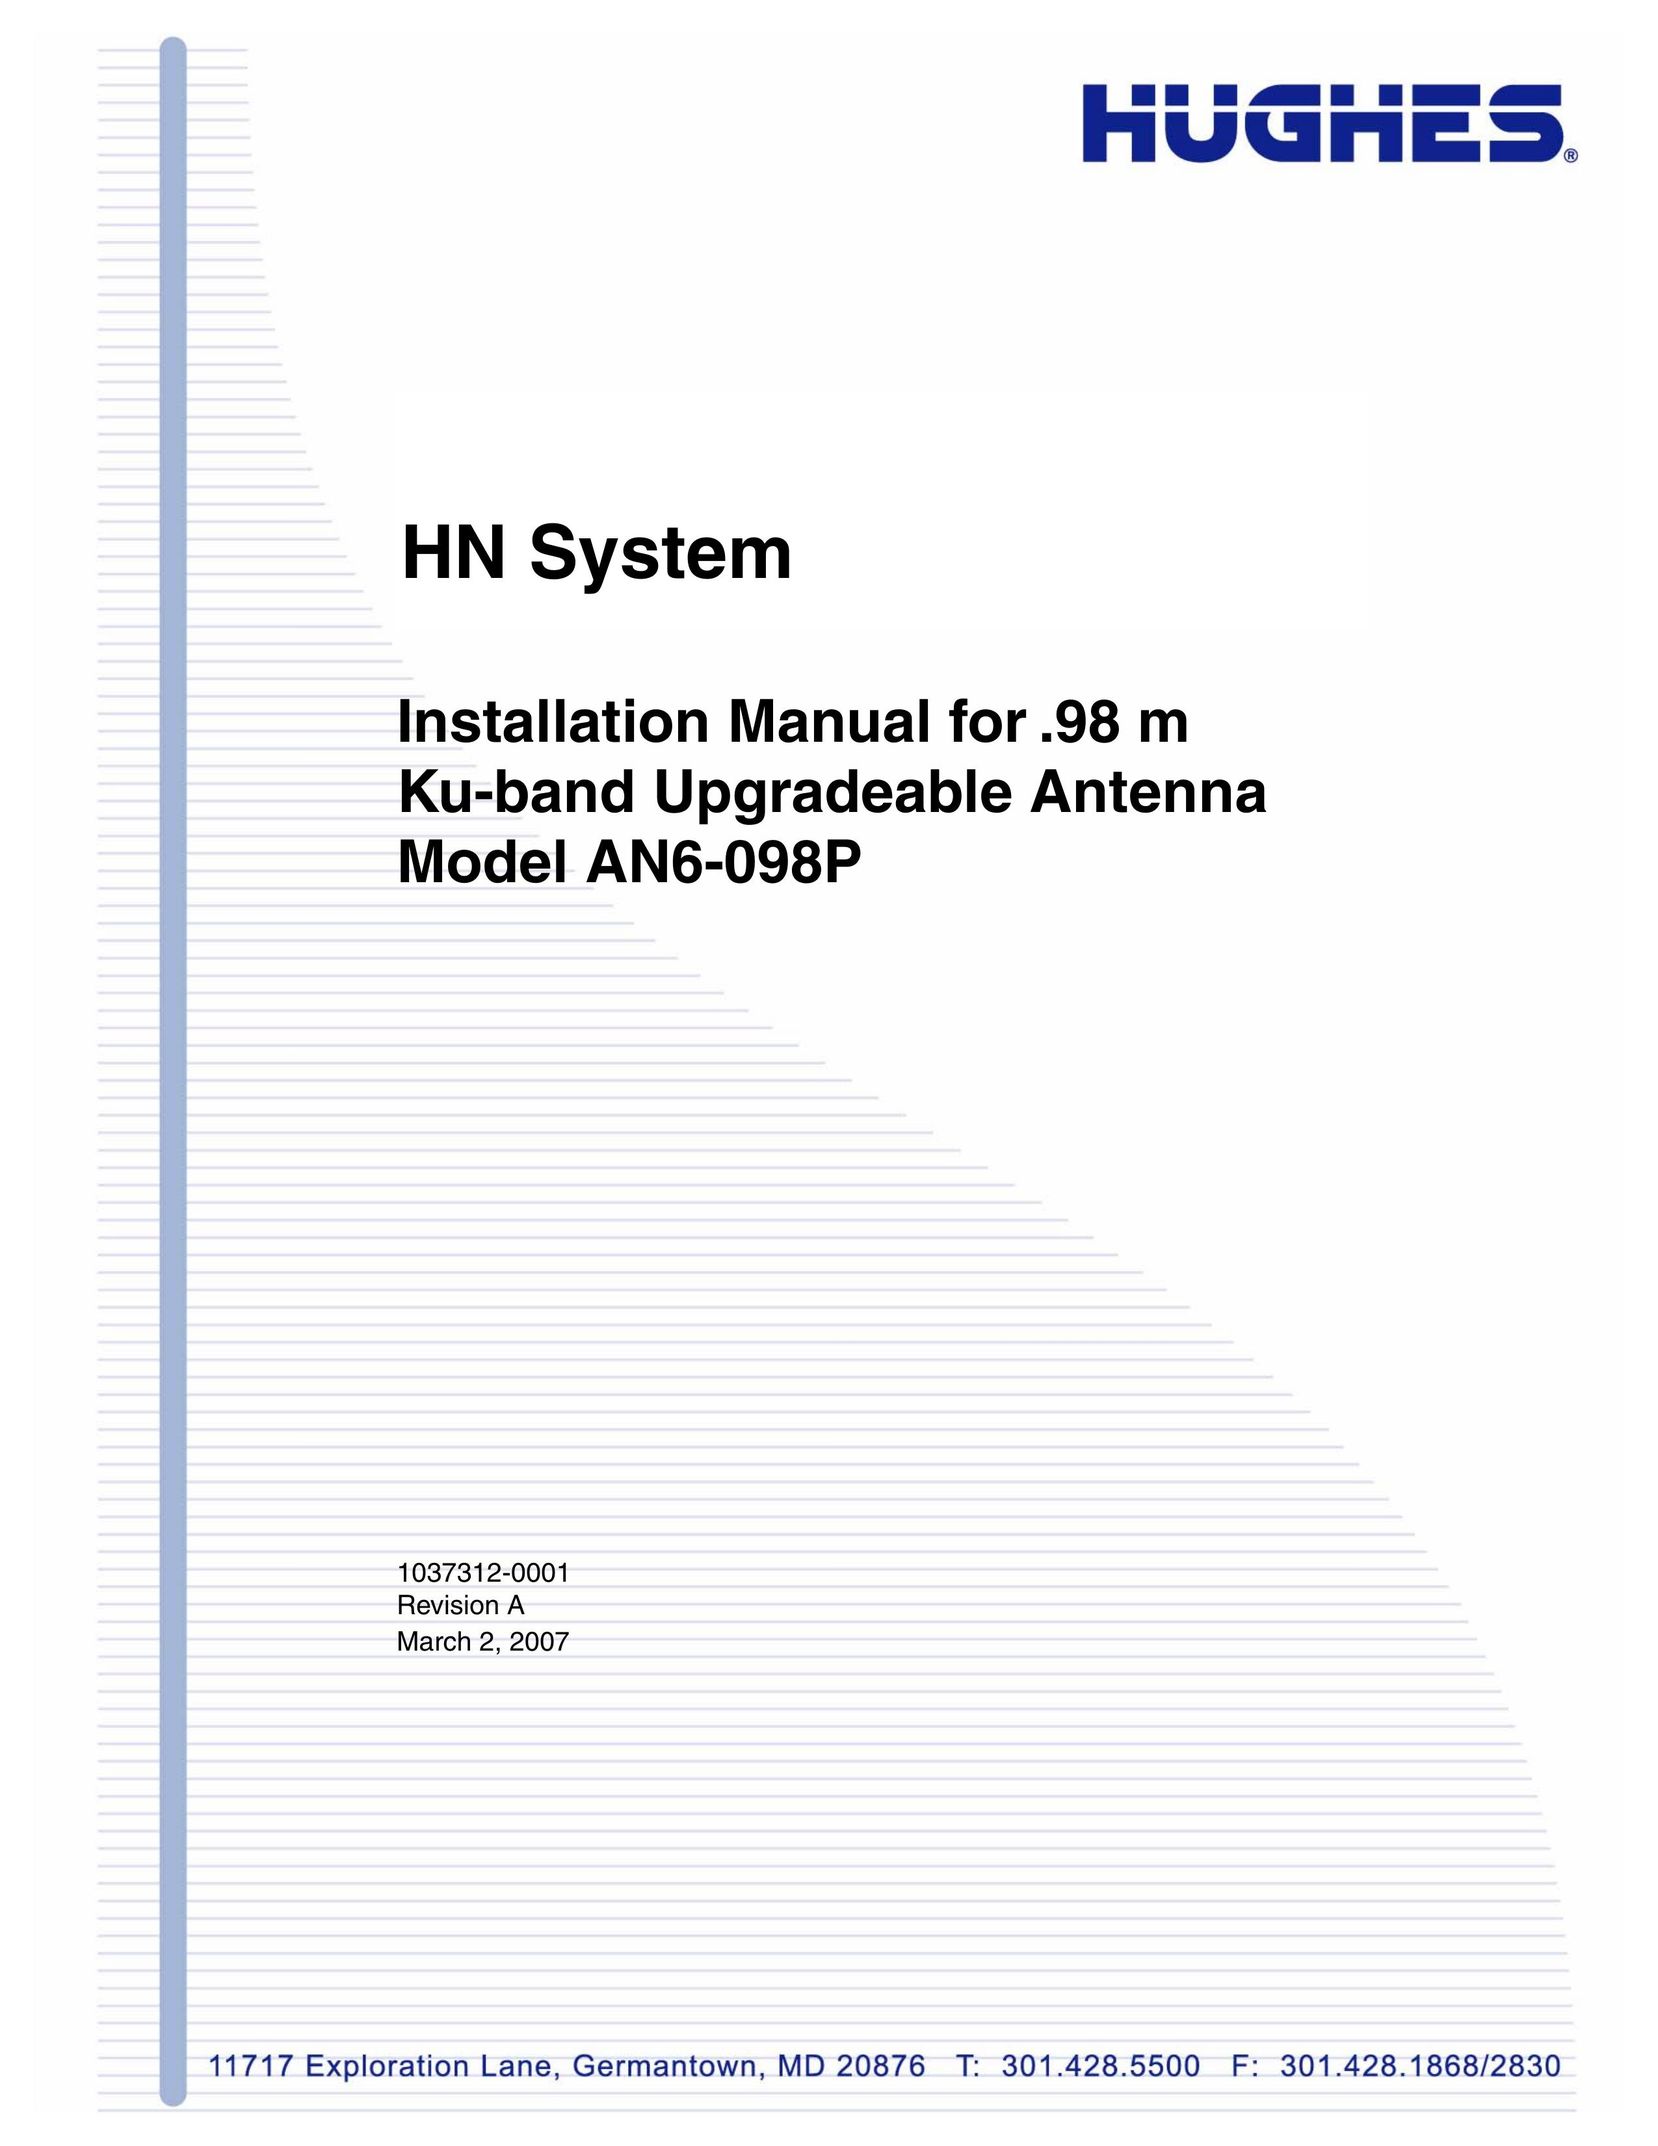 Hughes AN6-098P Stereo System User Manual